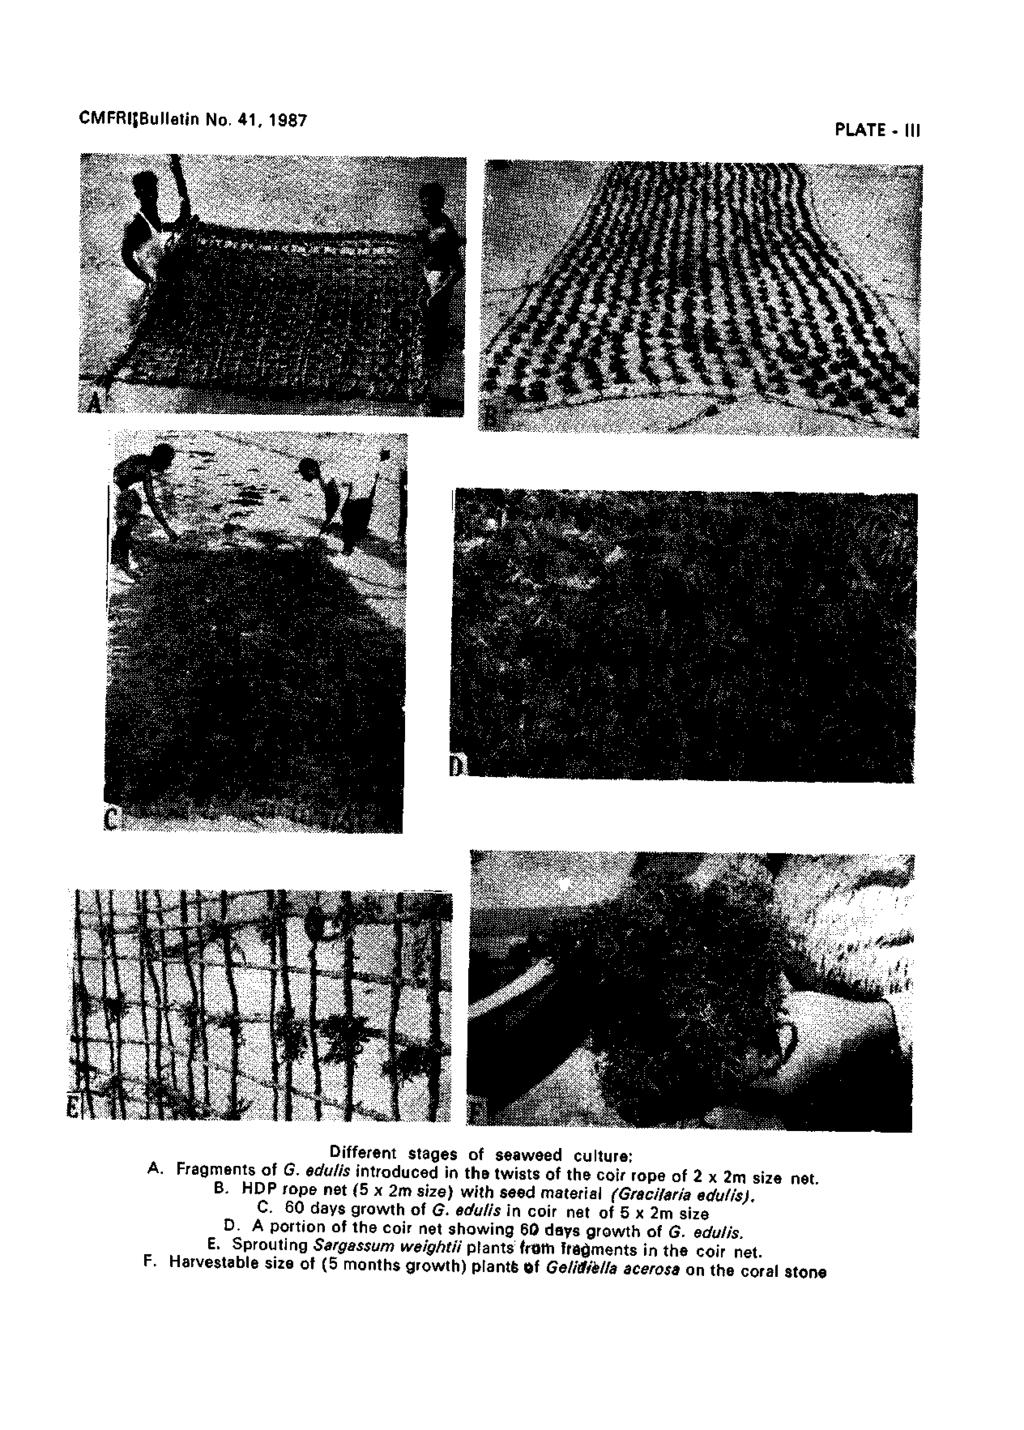 CMFRIJBulletin No. 41, 1987 PLATE Different stages of seaweed culture: A. Fragments of G. edulis introduced in the twists of the coir rope of 2 x 2m size net. B.